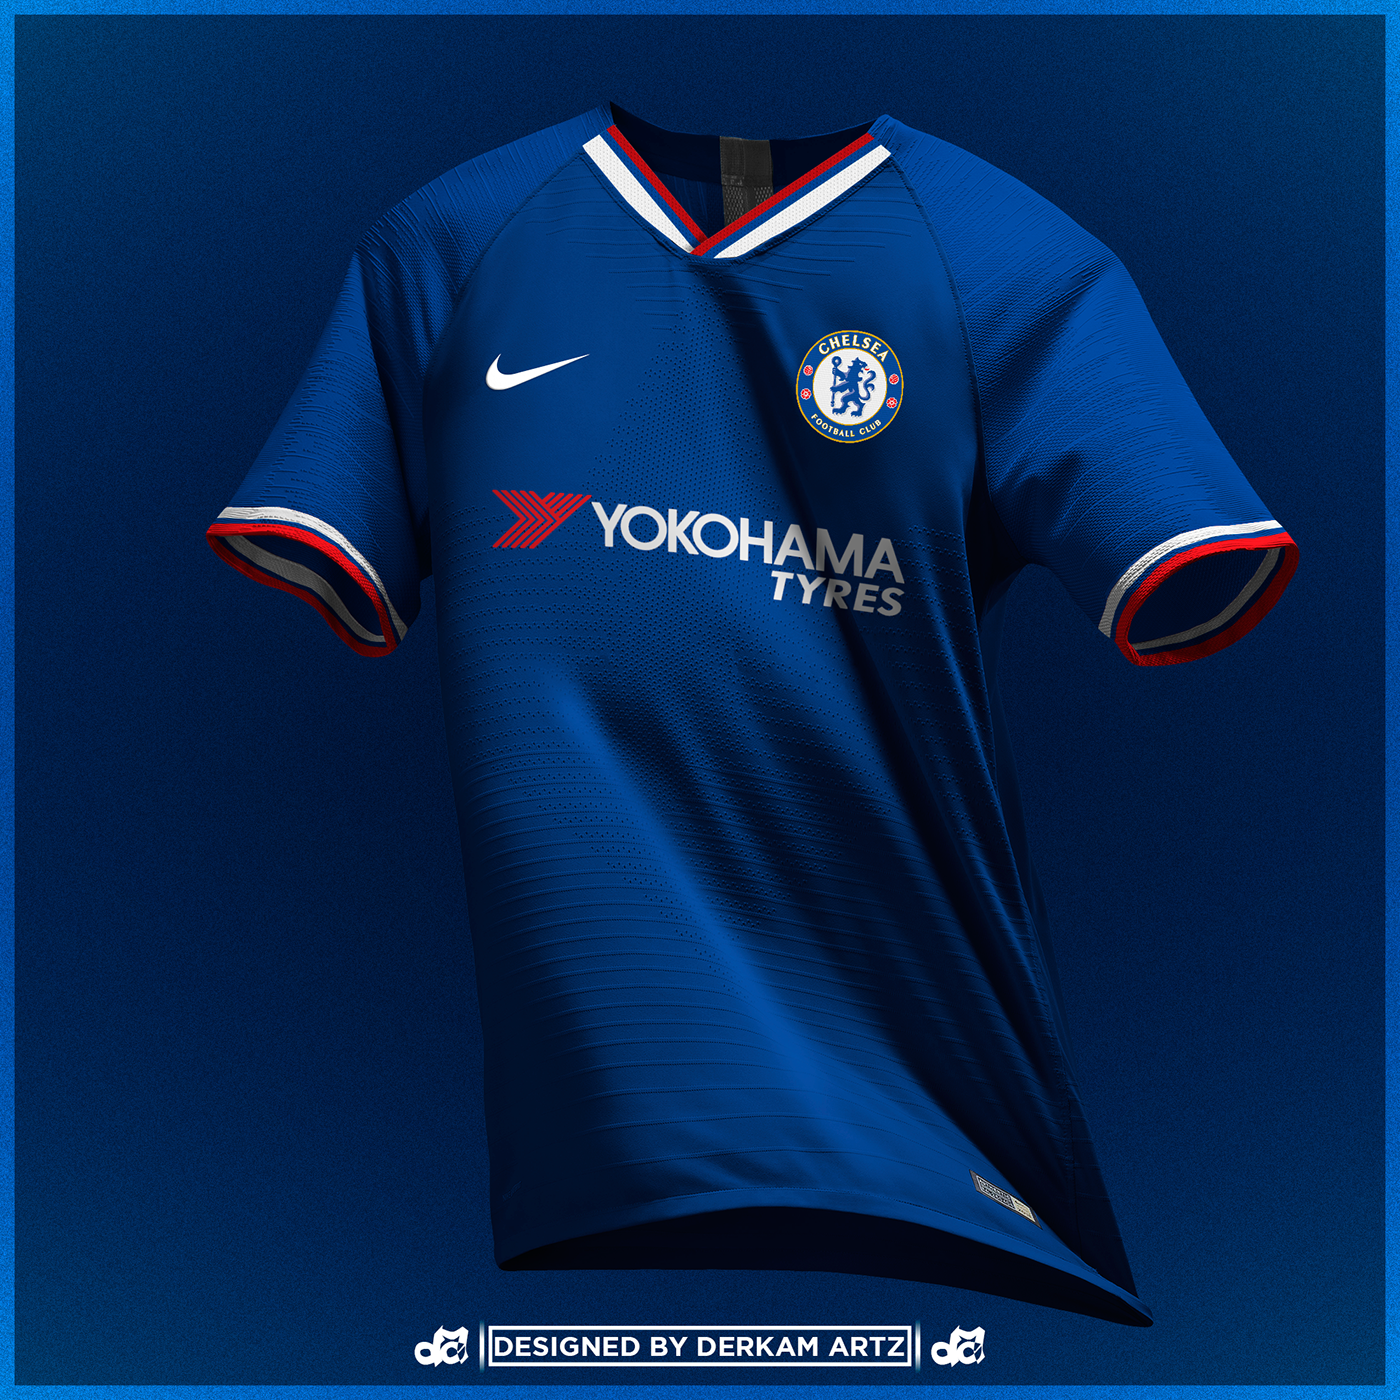 Chelsea Wallpaper 2020 / Chelsea FC Squad, Team, All Players 2020 : We